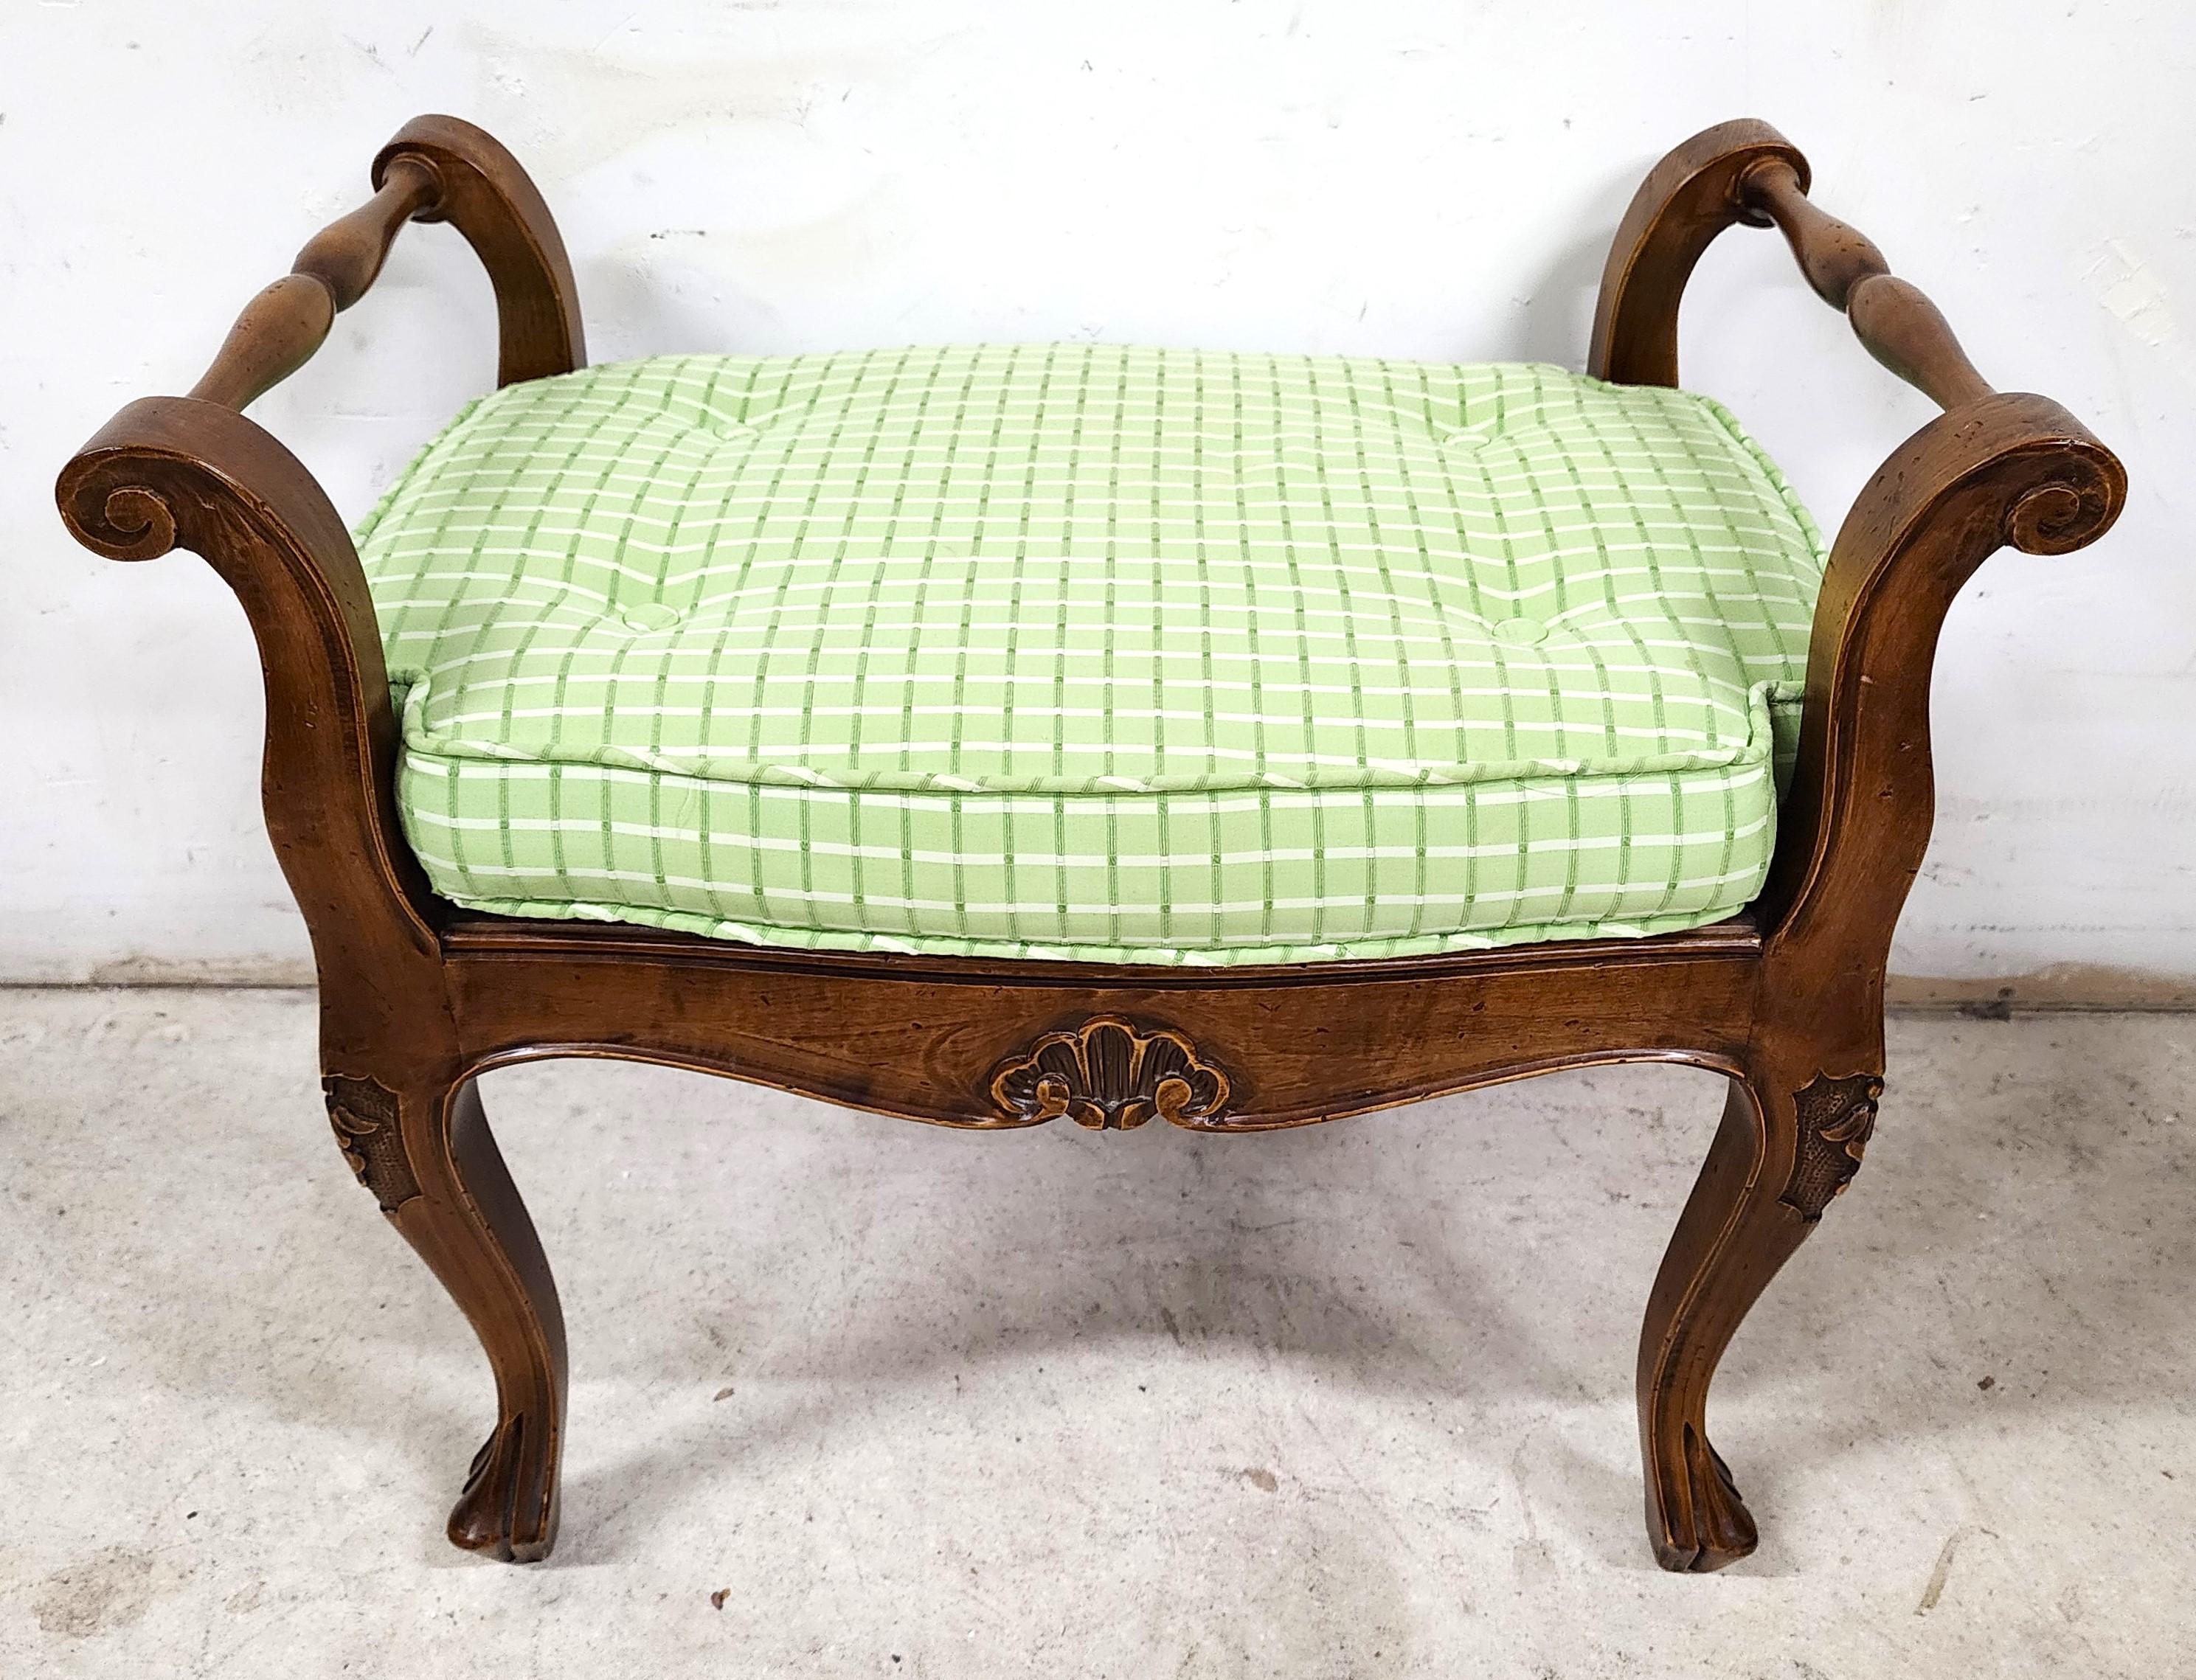 For FULL item description click on CONTINUE READING at the bottom of this page.

Offering One Of Our Recent Palm Beach Estate Fine Furniture Acquisitions Of A 
Vintage Country French Bench With Cane Seat and Reversible Cushion
(We had 2 of these